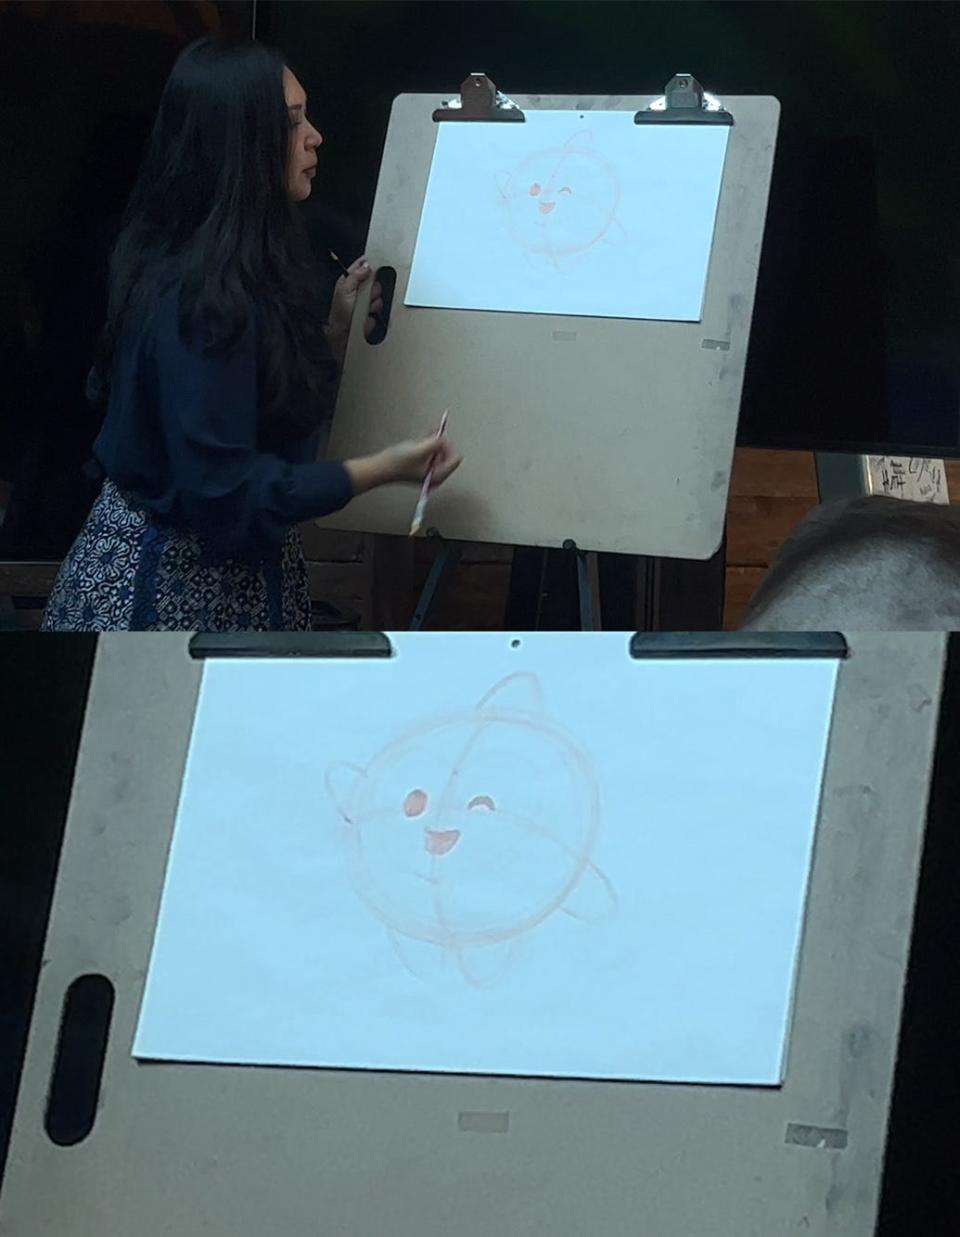 Griselda Sastrawinata-Lemay shows us how to draw Star's face.